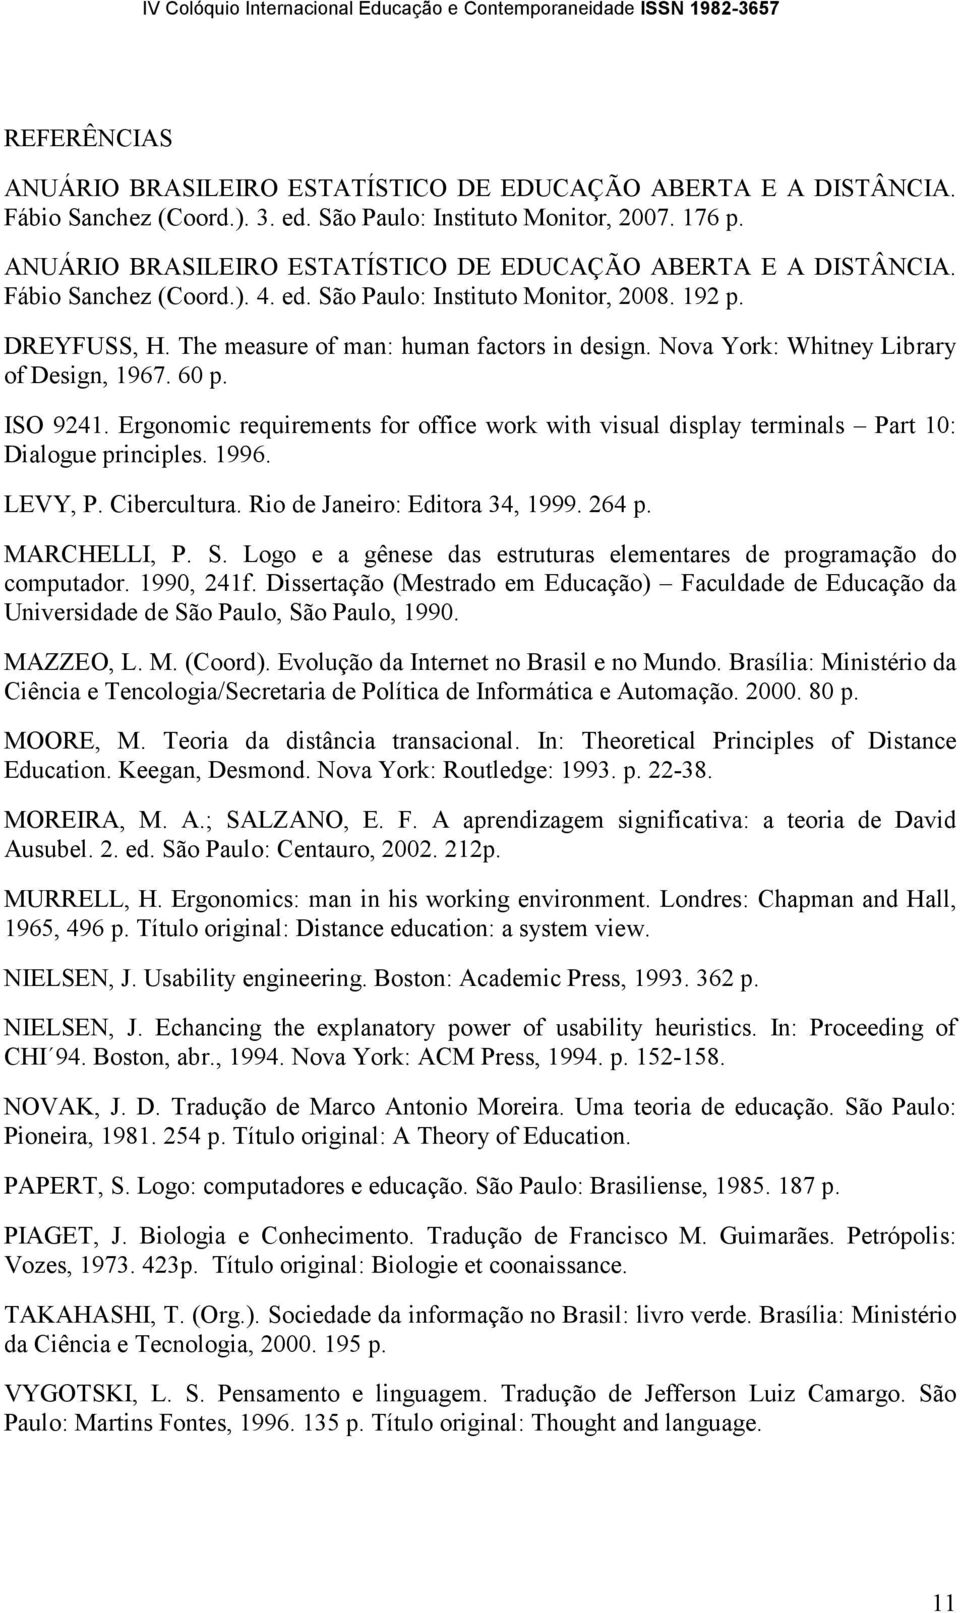 Nova York: Whitney Library of Design, 1967. 60 p. ISO 9241. Ergonomic requirements for office work with visual display terminals Part 10: Dialogue principles. 1996. LEVY, P. Cibercultura.